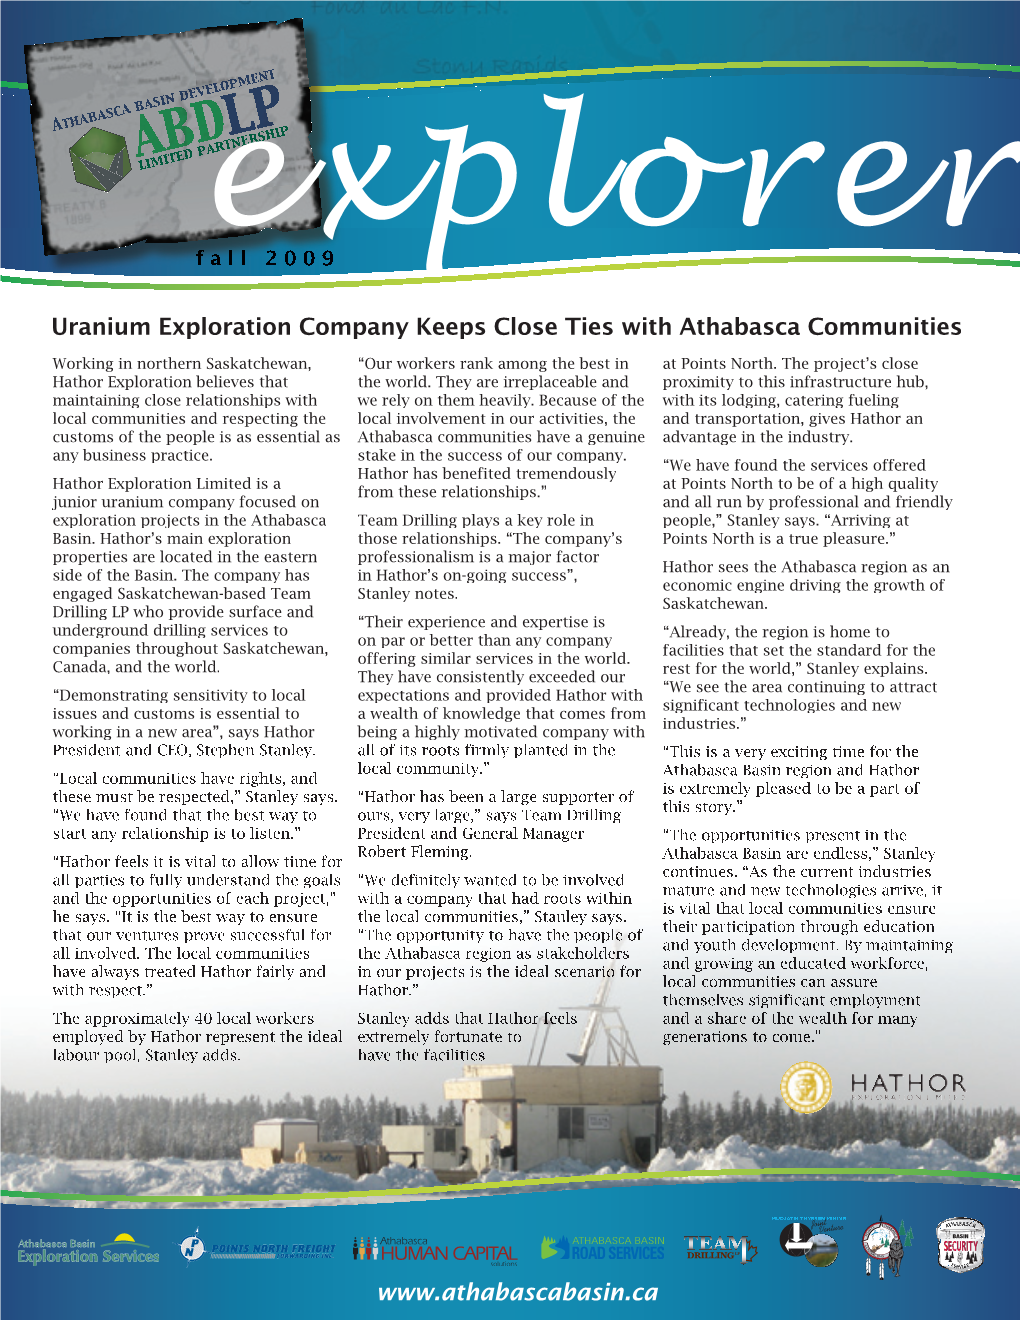 Uranium Exploration Company Keeps Close Ties with Athabasca Communities